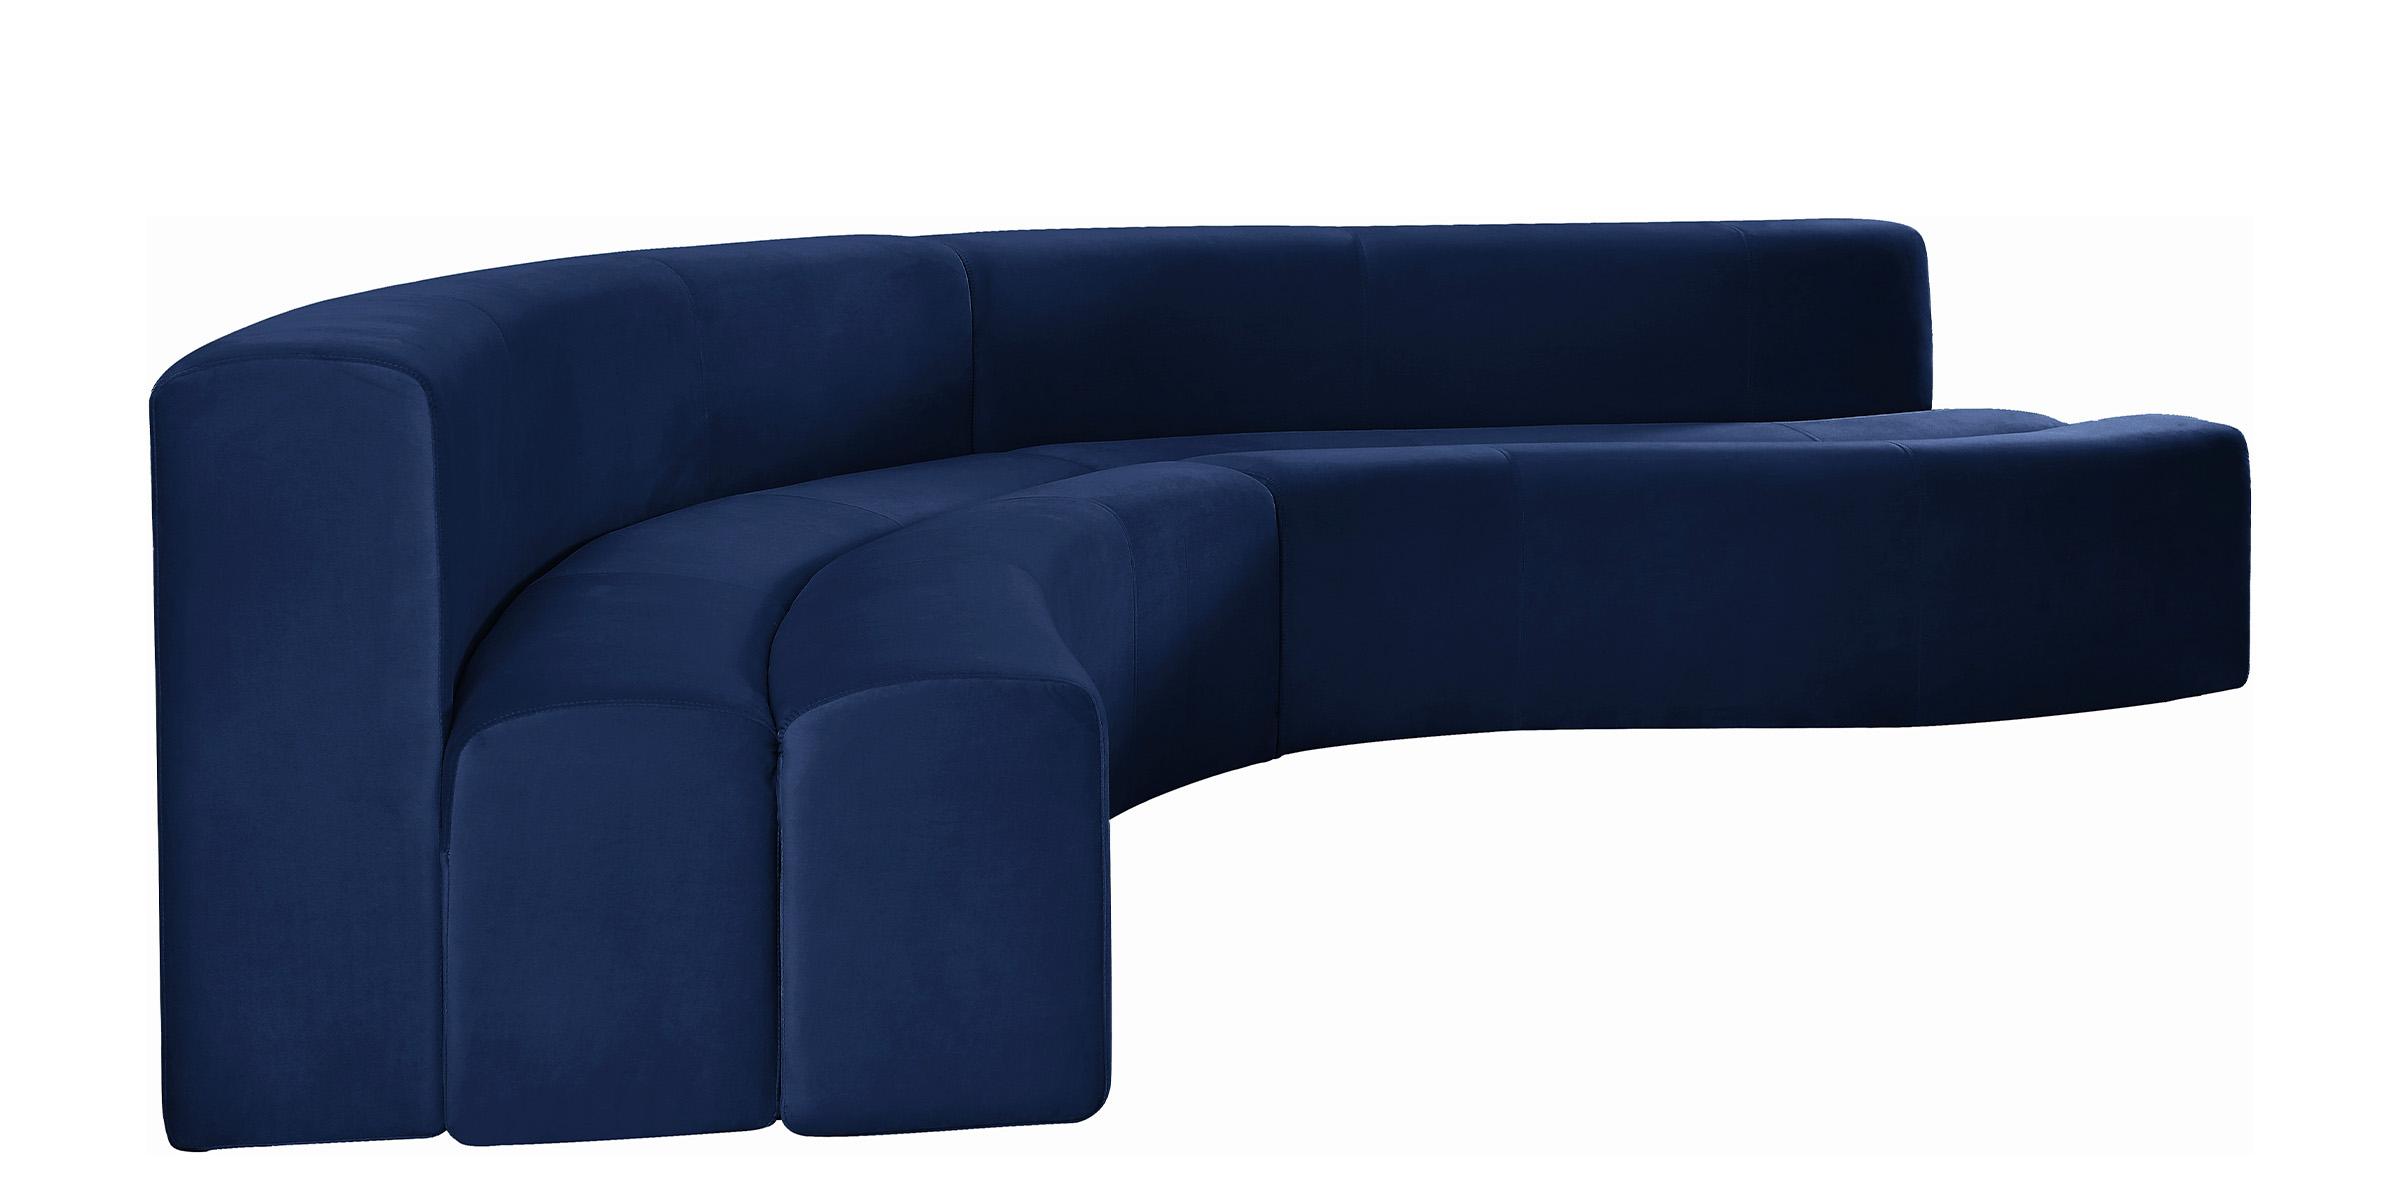 Contemporary, Modern Sectional Sofa Curl 624Navy-Sectional 624Navy-Sectional in Navy Velvet